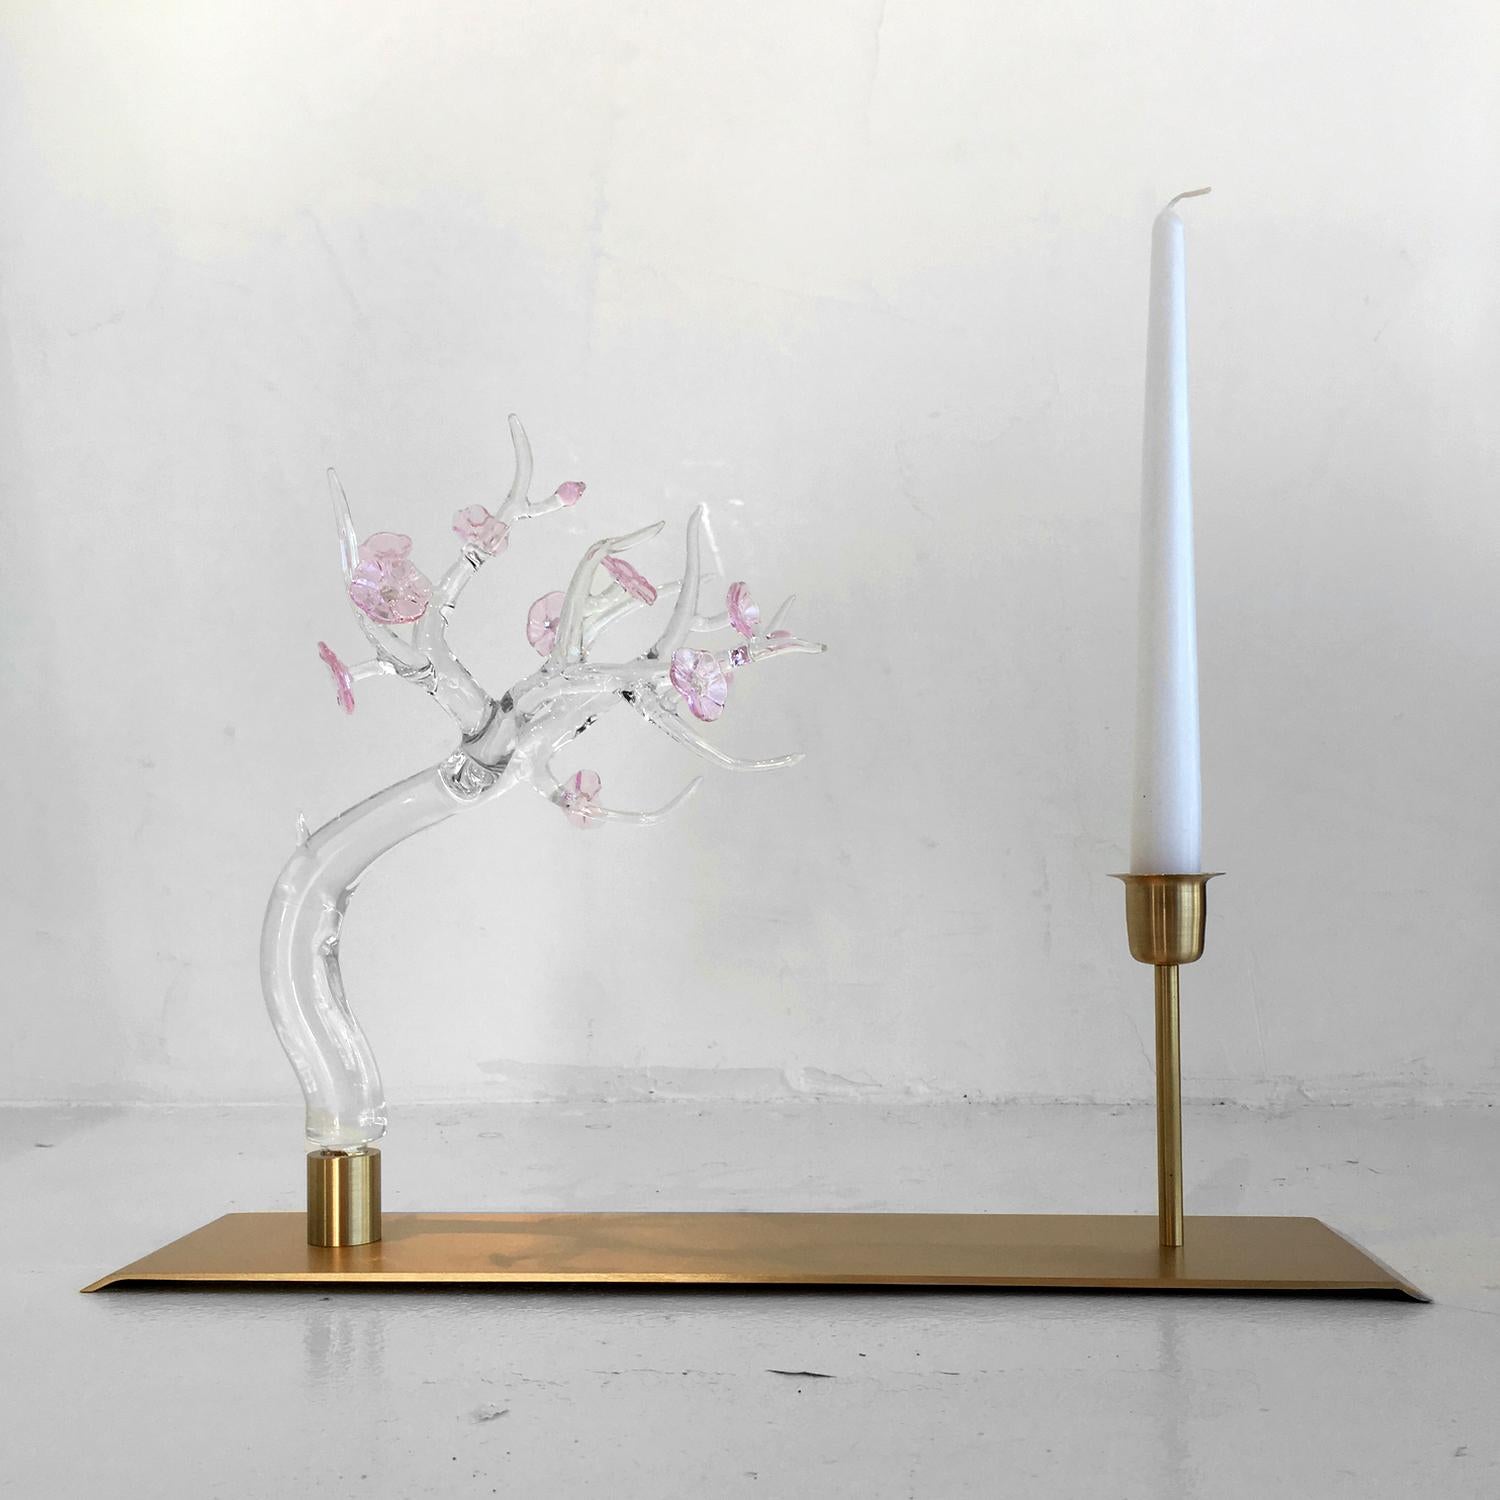 Single candle glass sculpture, designed by Simone Crestani.

Made in Italy:
Made in Italy furniture means design, quality, style and sophistication.
The typical elegance of Italian design can be found in this piece. No wonder that the world